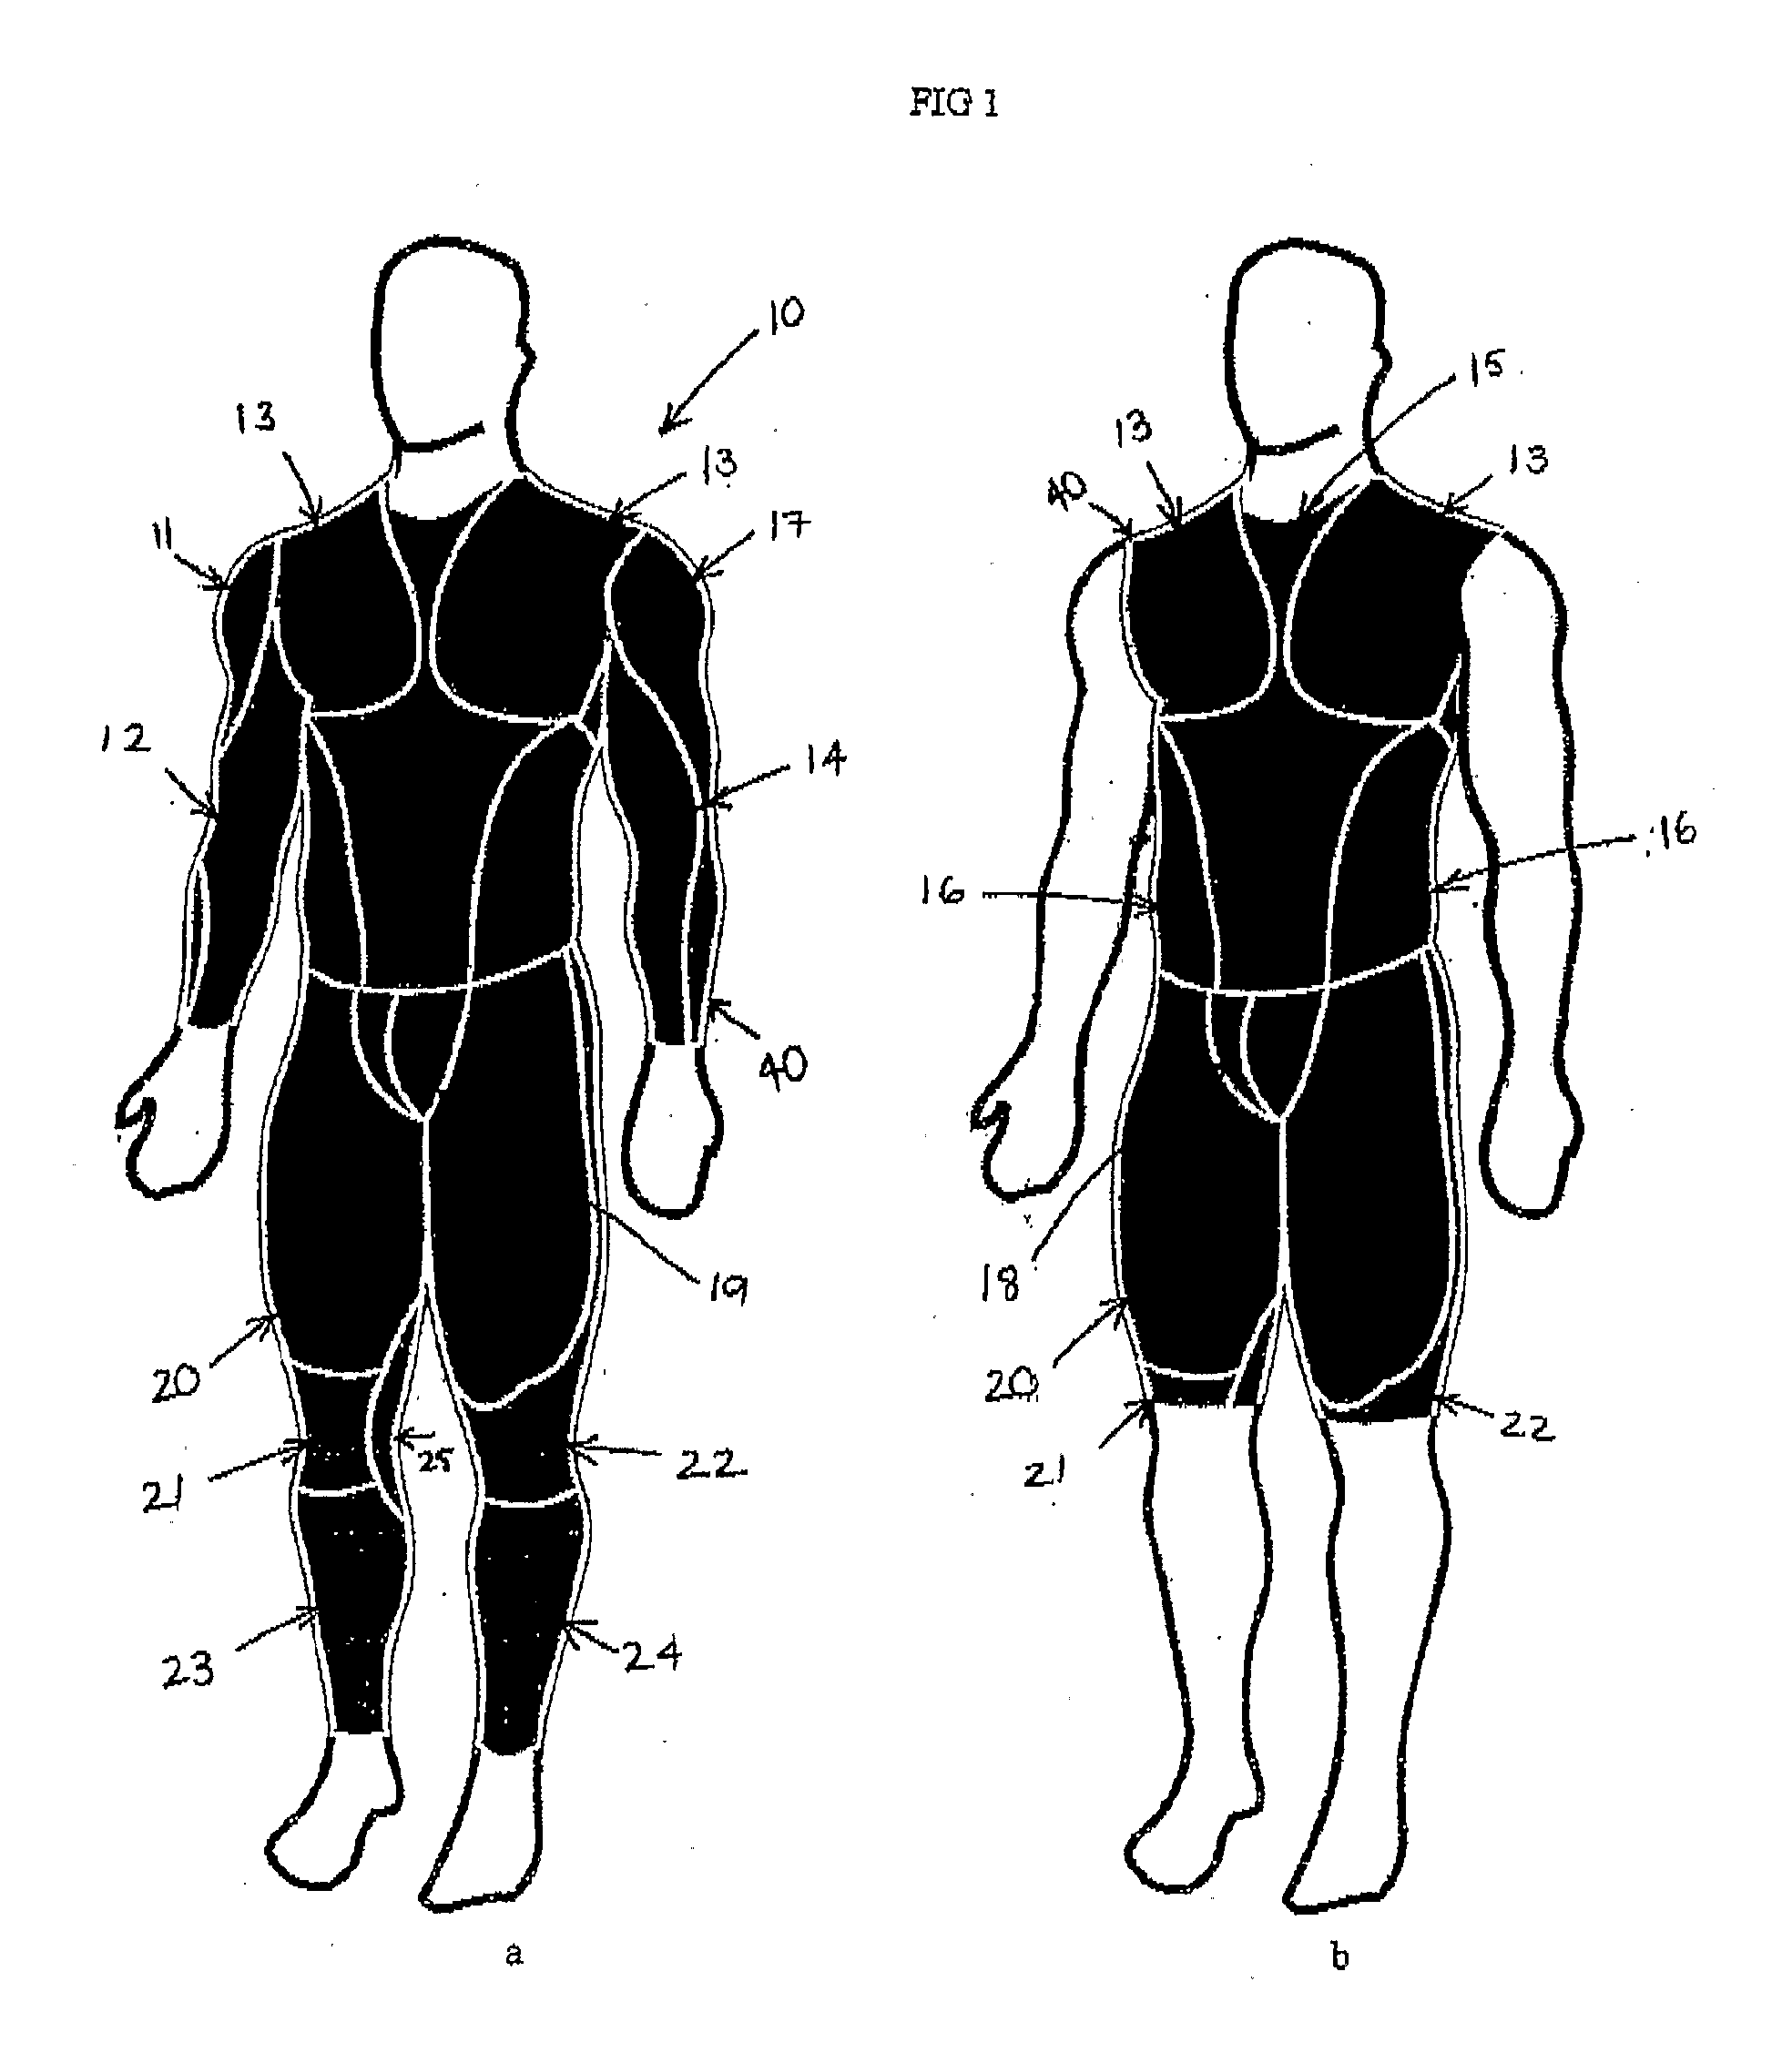 Compression garment or method of manufacture